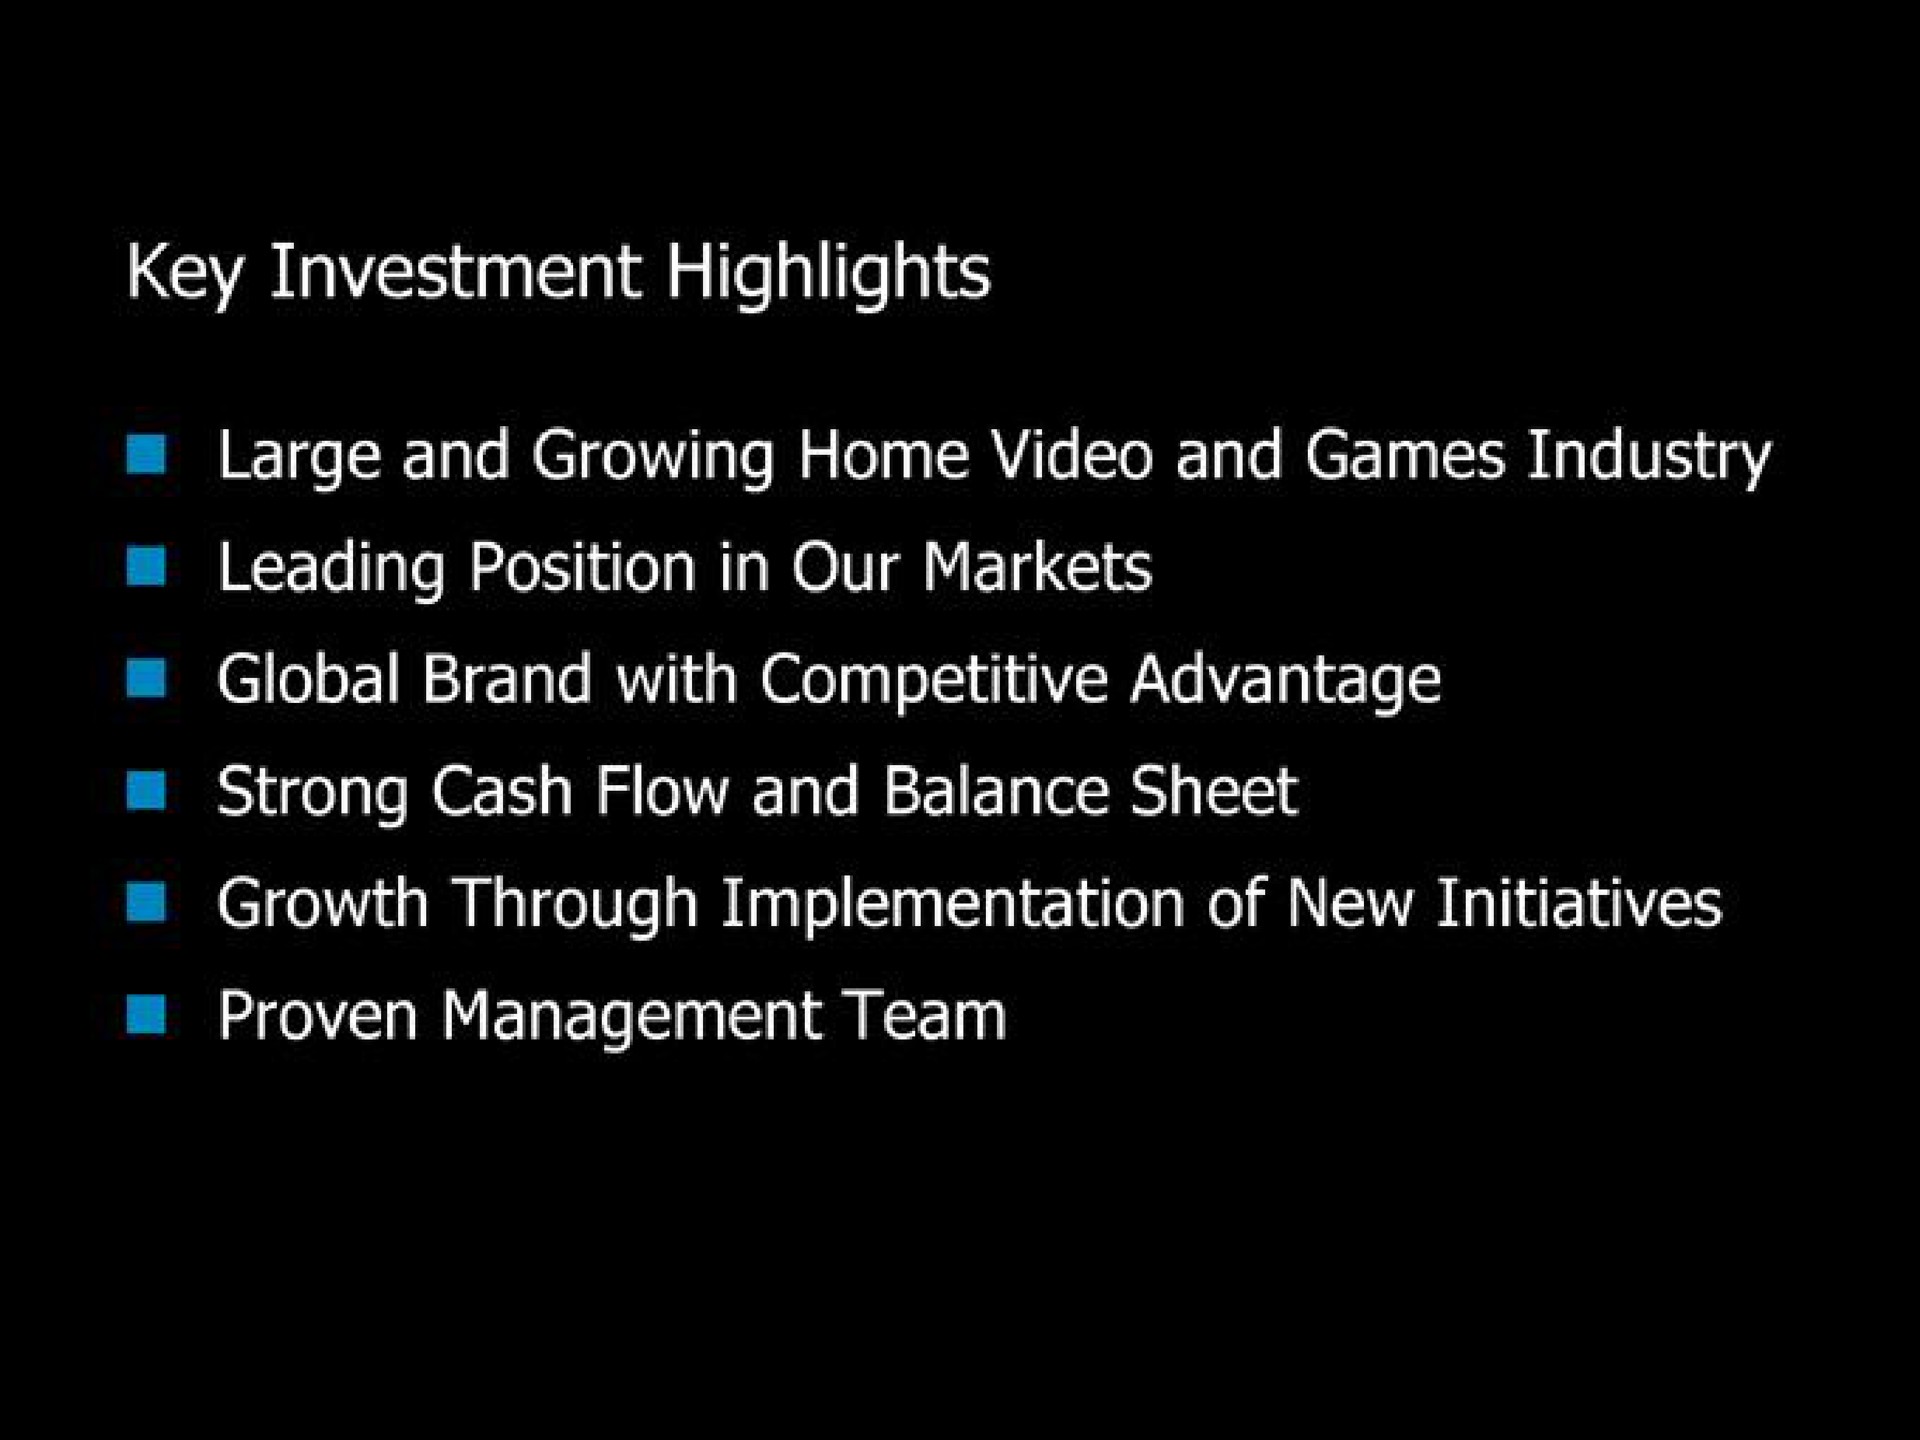 cava alae large and growing home video and games industry leading position in our markets strong cash flow and balance sheet growth through implementation of new initiatives | Blockbuster Video